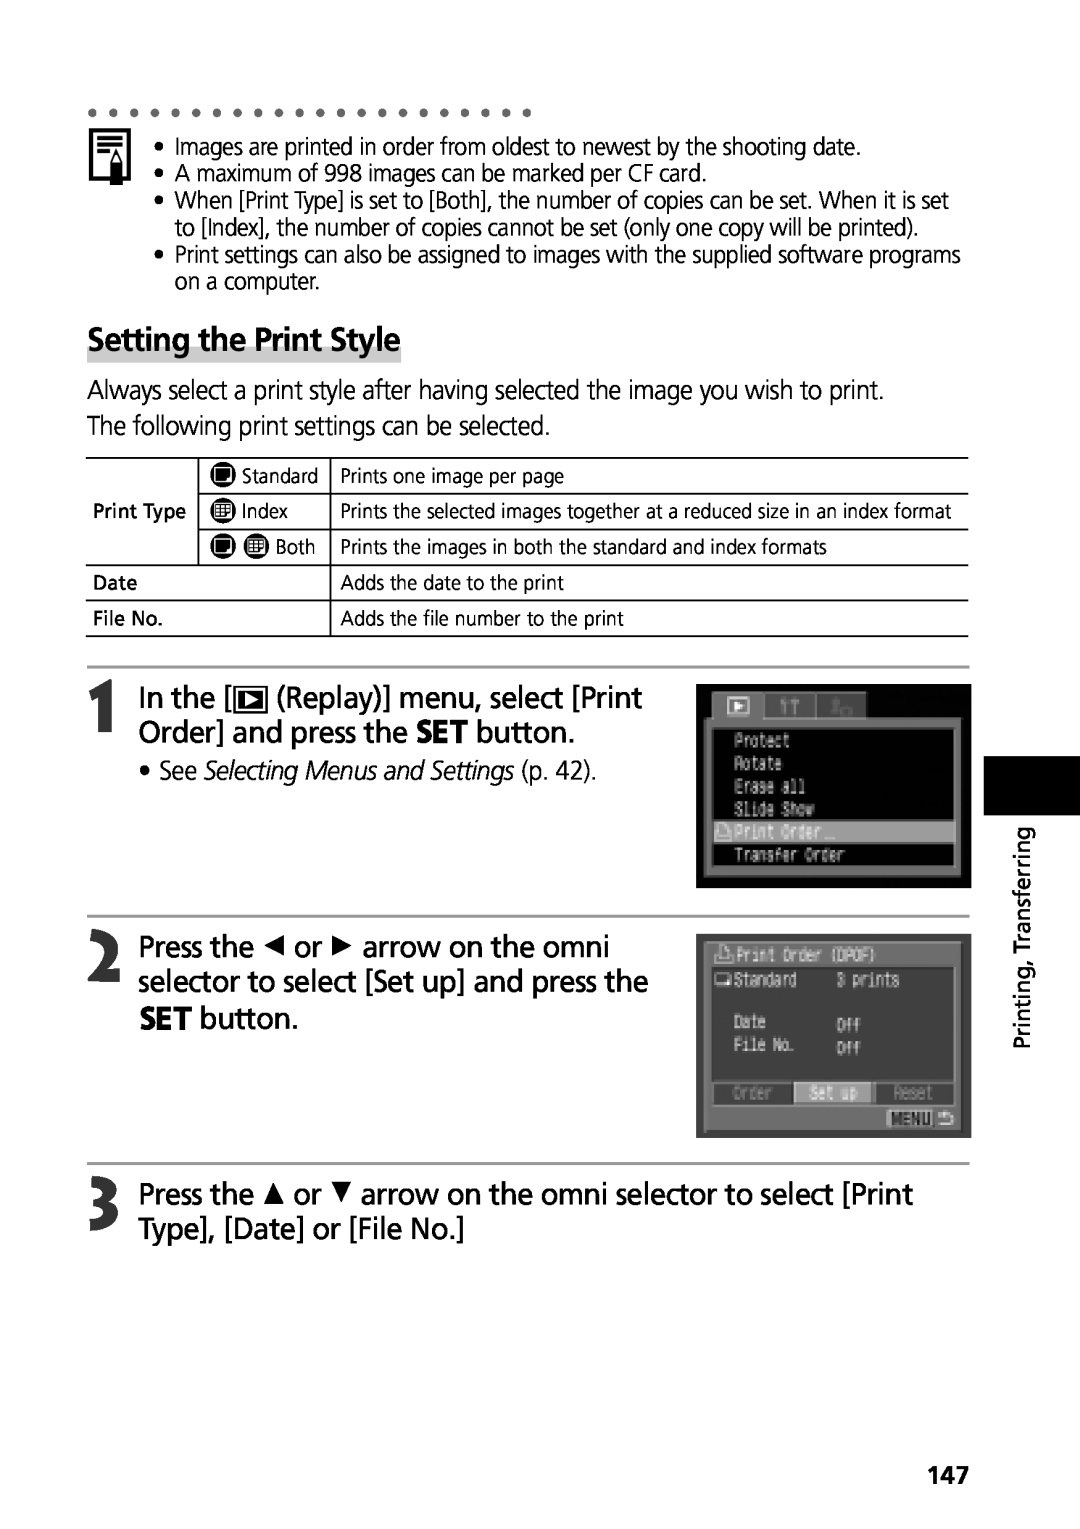 Canon G3 manual Setting the Print Style, A maximum of 998 images can be marked per CF card 